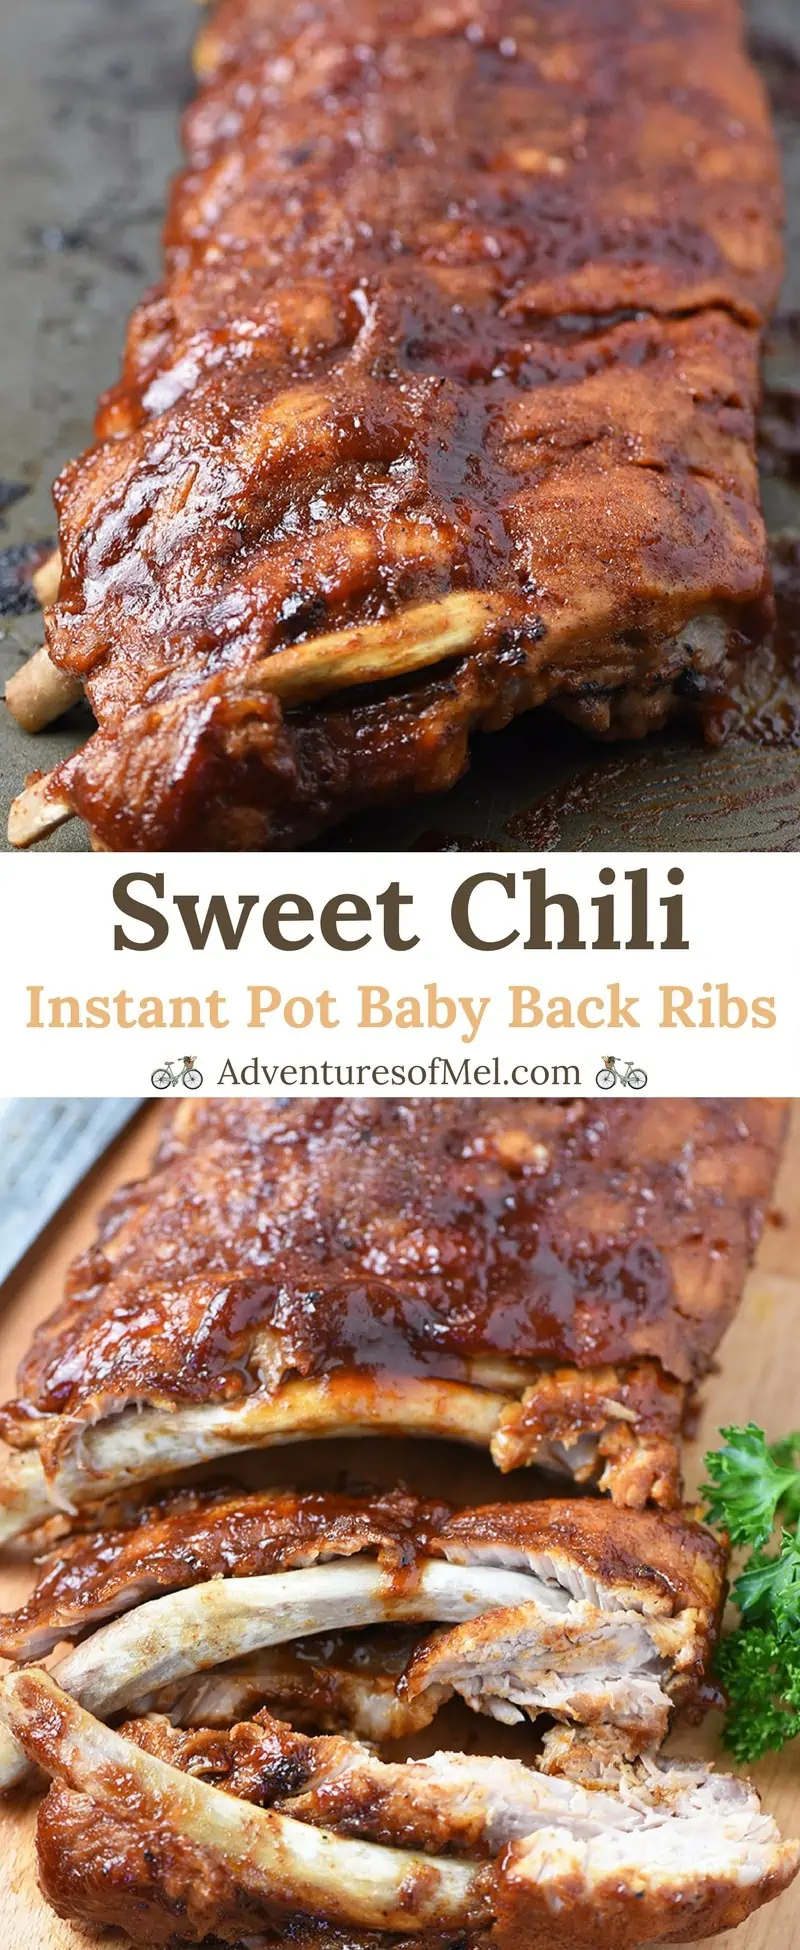 Easy recipe for Sweet Chili Instant Pot Baby Back Ribs